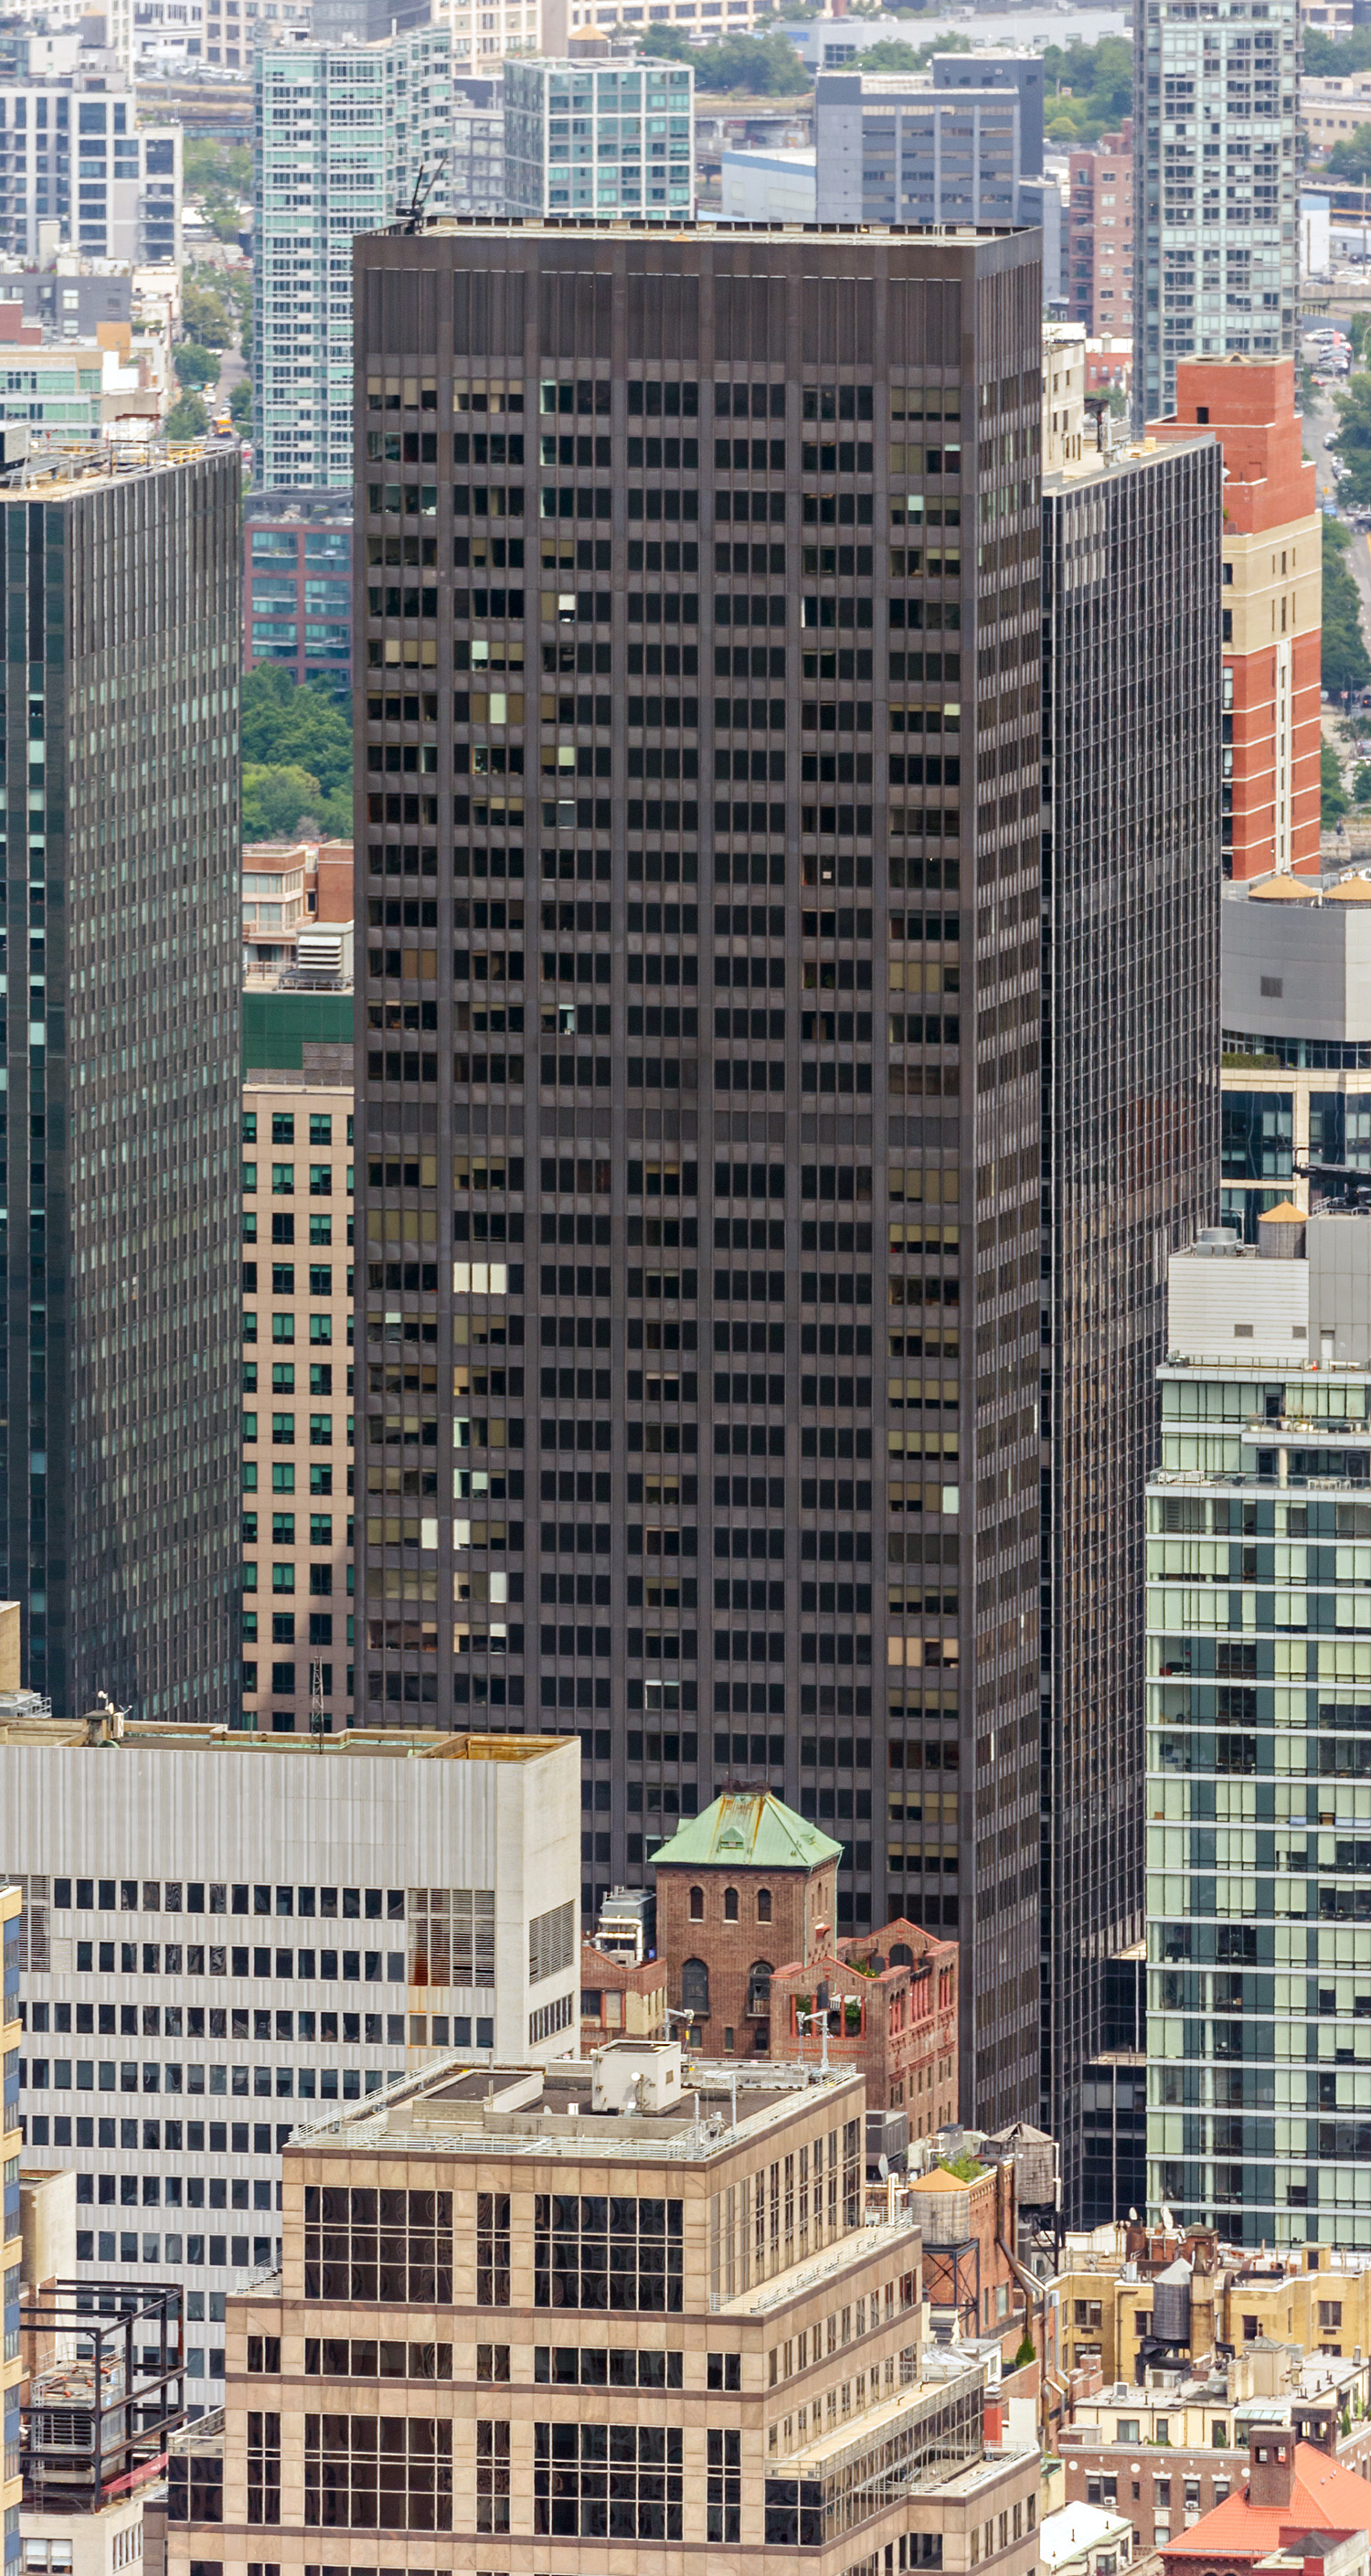 600 Third Avenue, New York City - View from The Edge. © Mathias Beinling